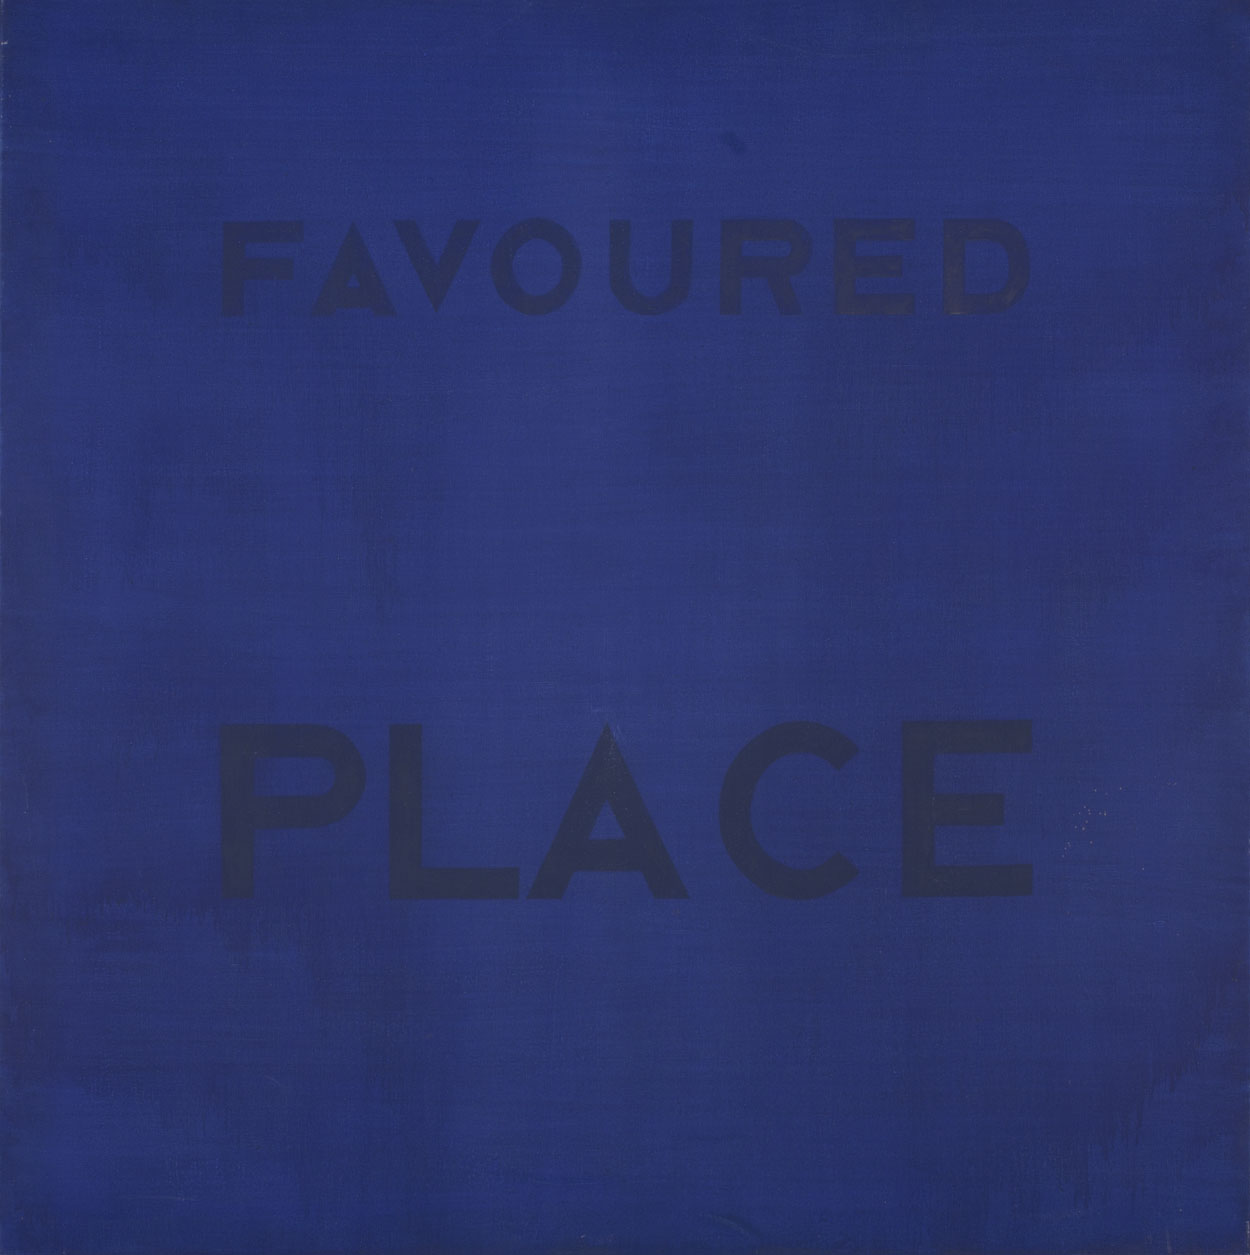 Favoured Place painting